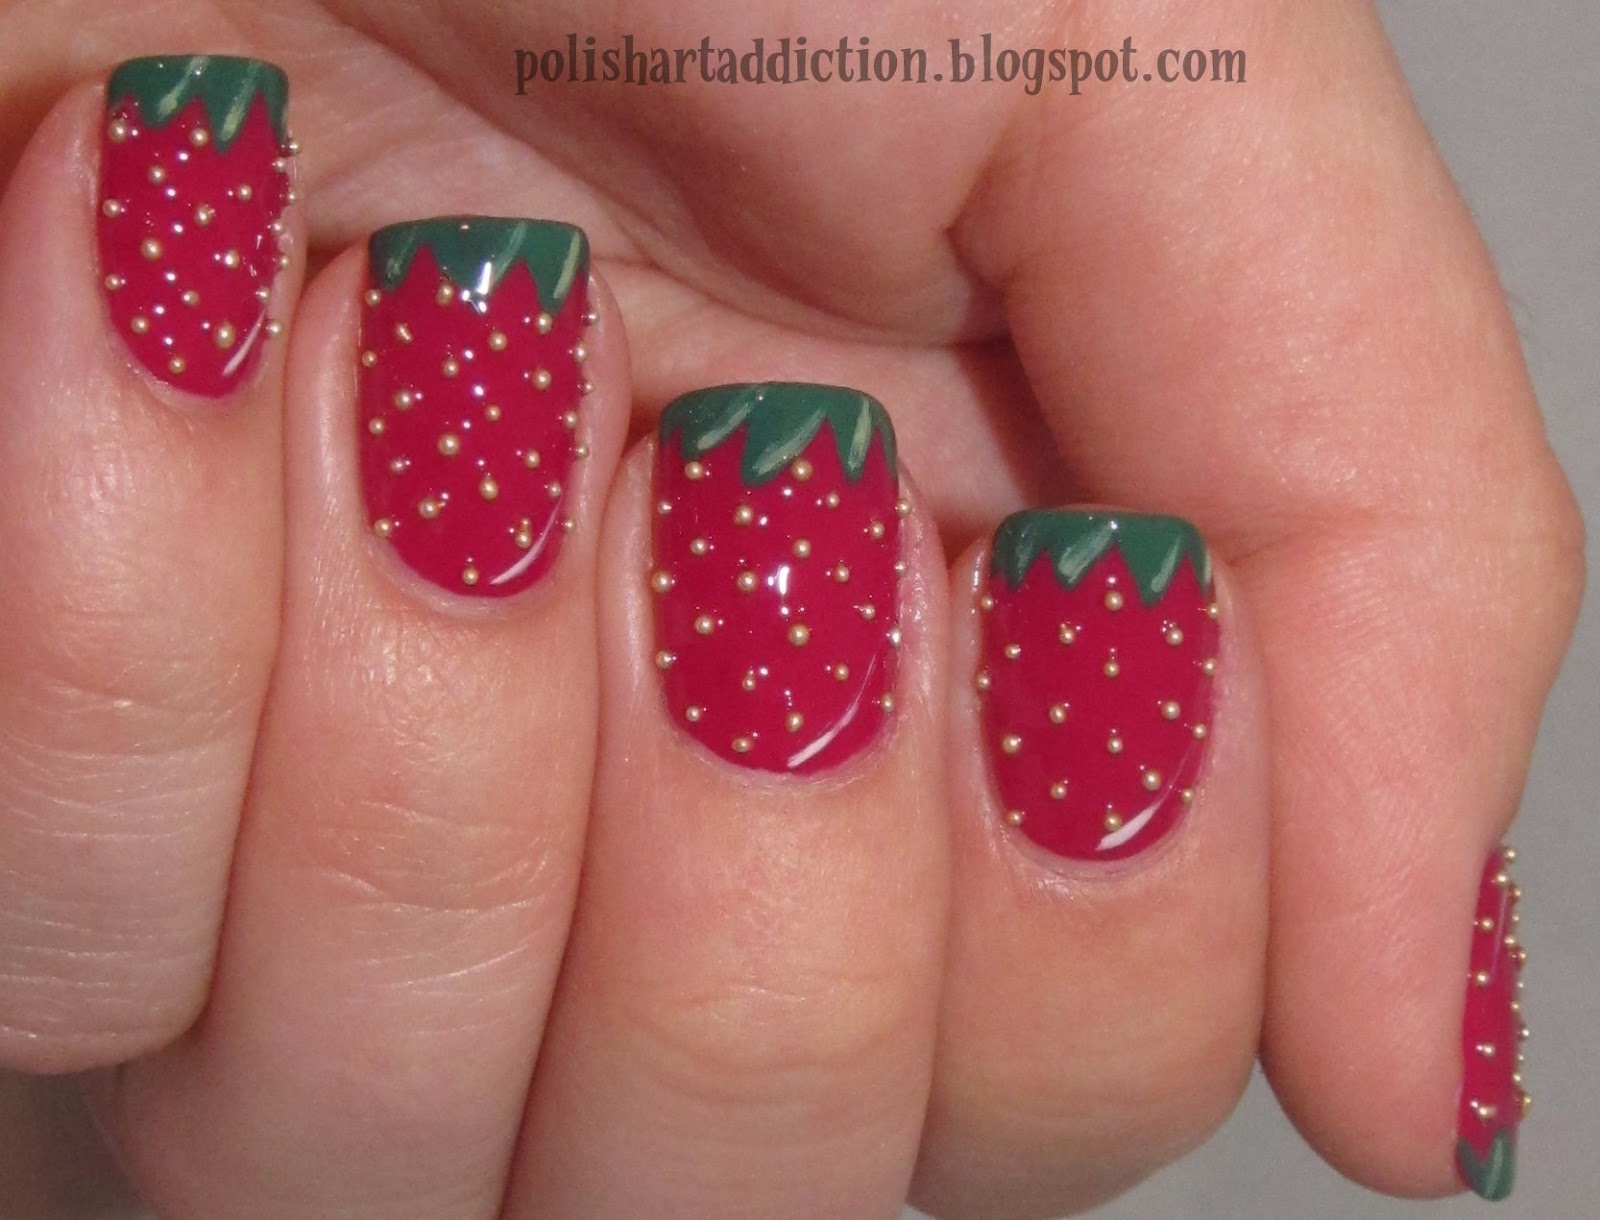 Chocolate Covered Strawberry Nail Art Tutorial - wide 7